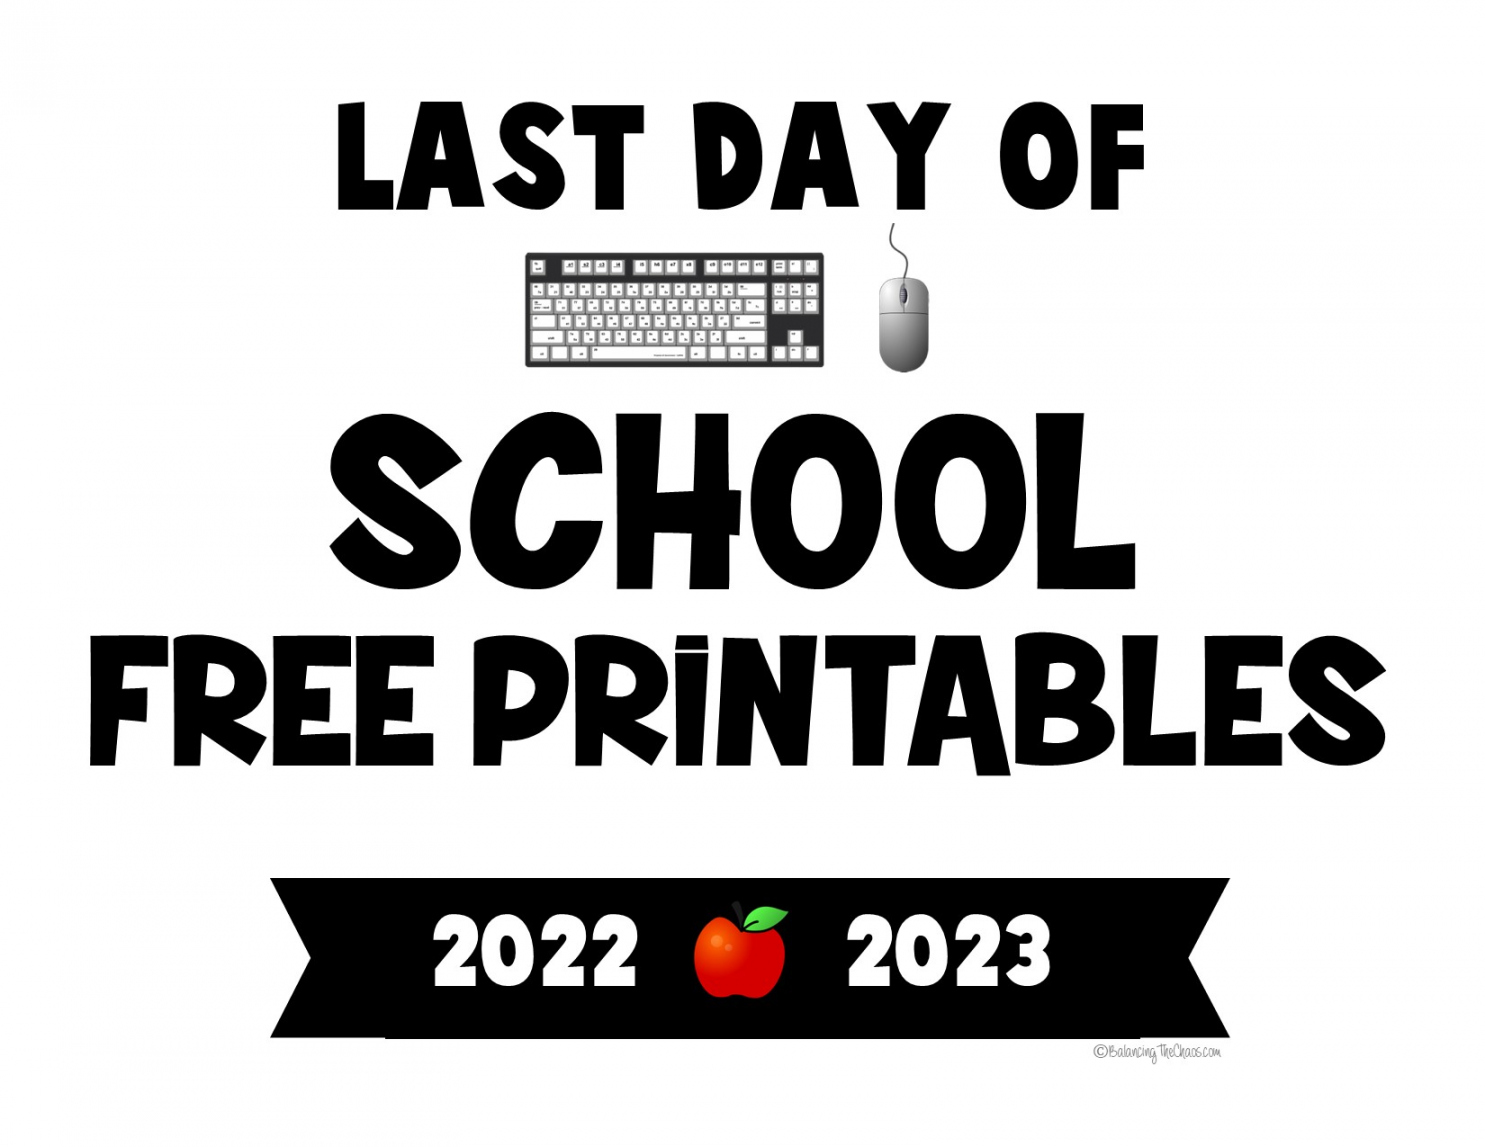 Last Day of School Signs Free Printable 2023 - Printable - FREE PRINTABLE: - Last Day of School Signs - Balancing The